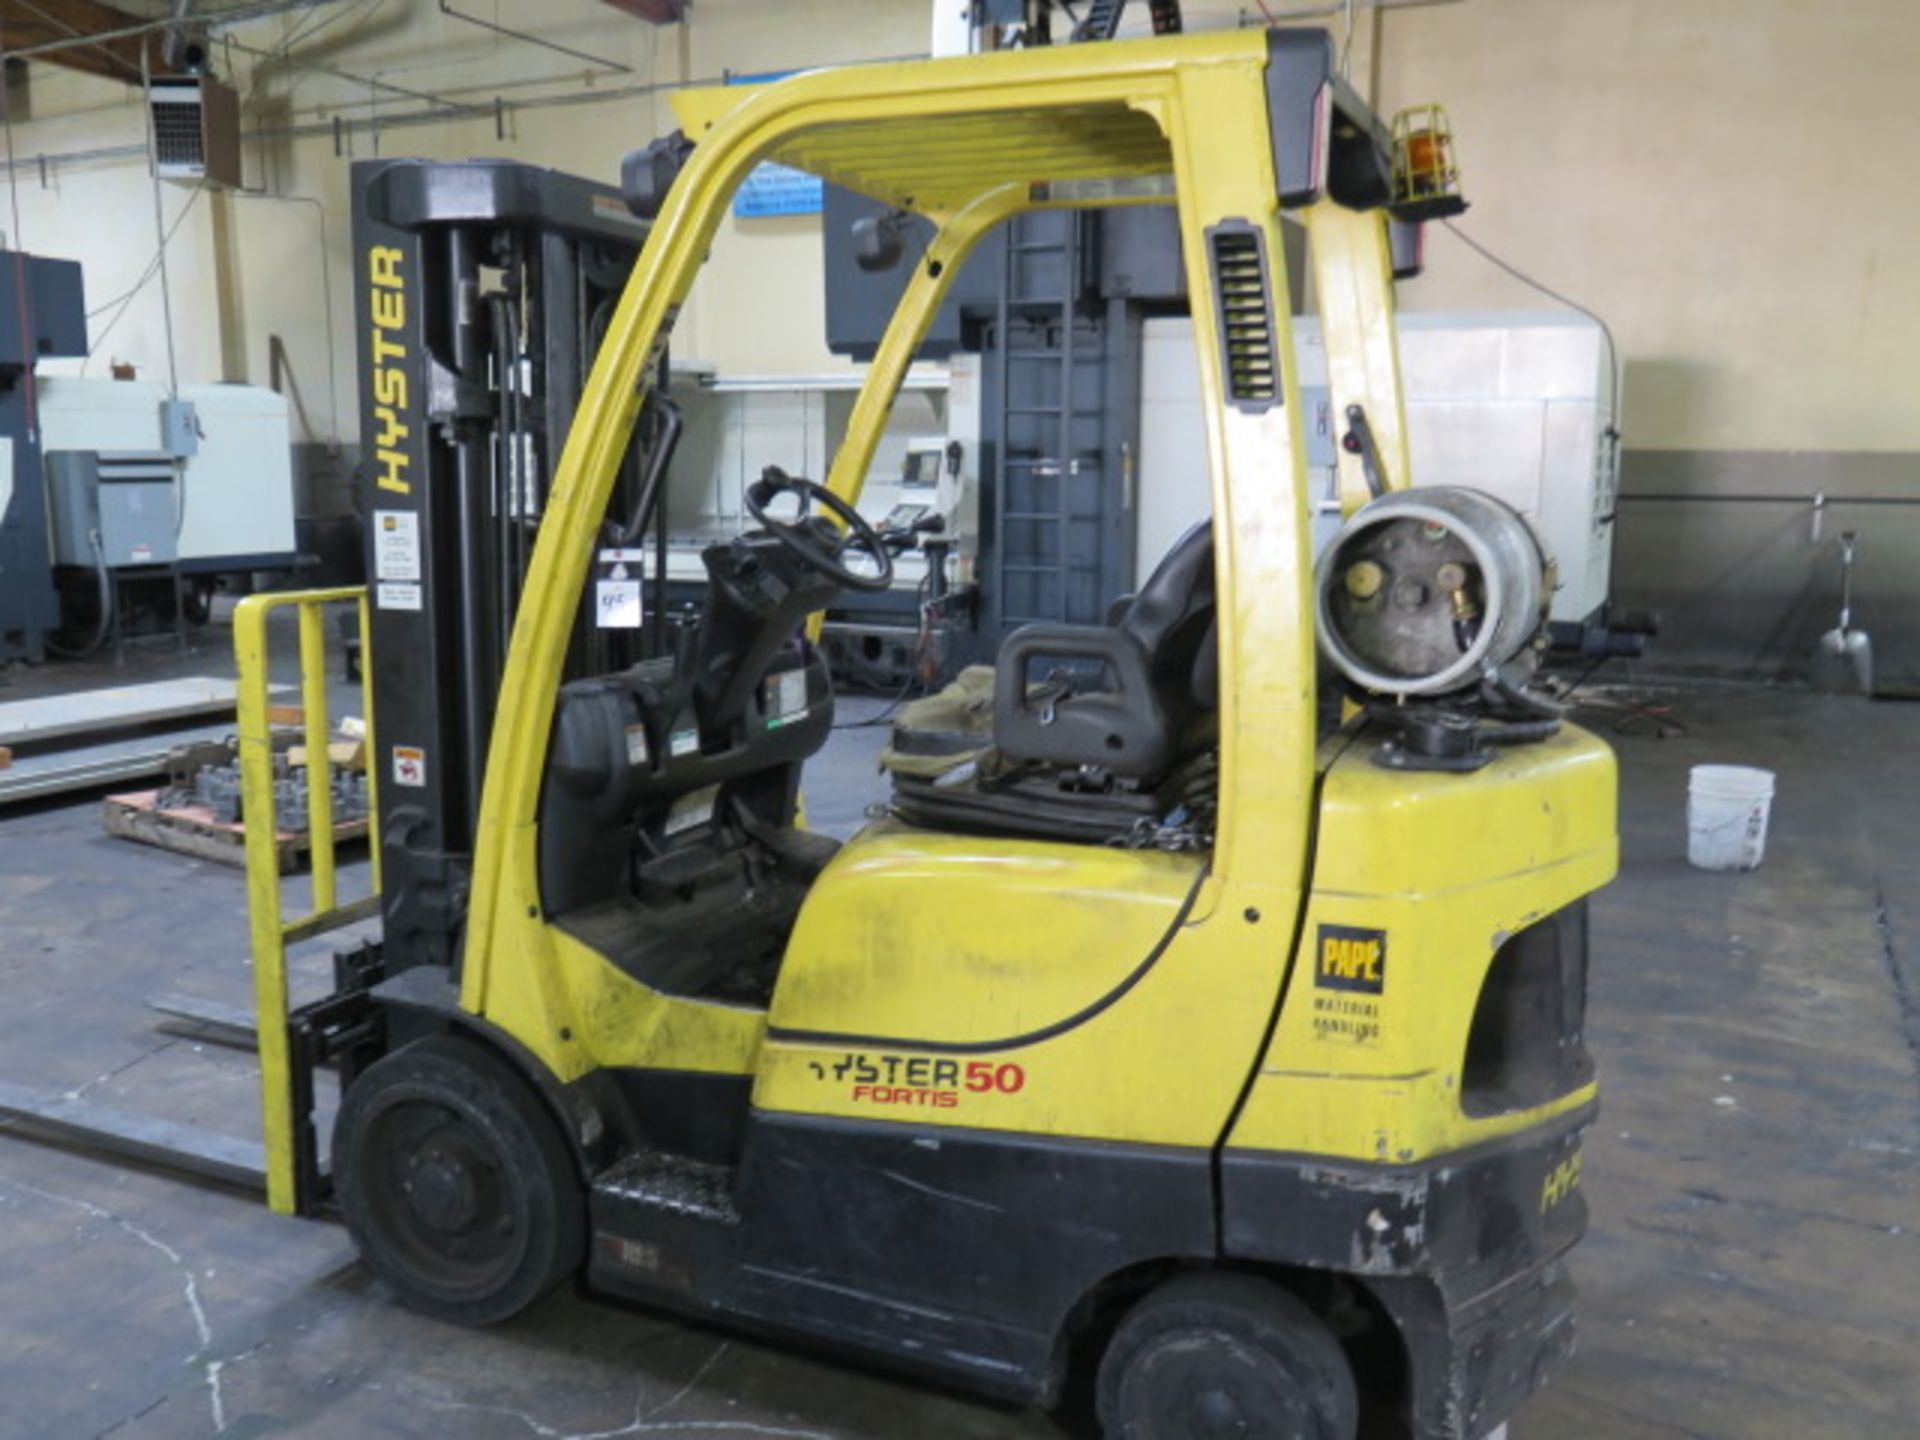 Hyster Fortis S50FT 5000 Lb Cap LPG Forklift s/n H187V07907R w/ Keyless Start, 3-Stage, SOLD AS IS - Image 2 of 15